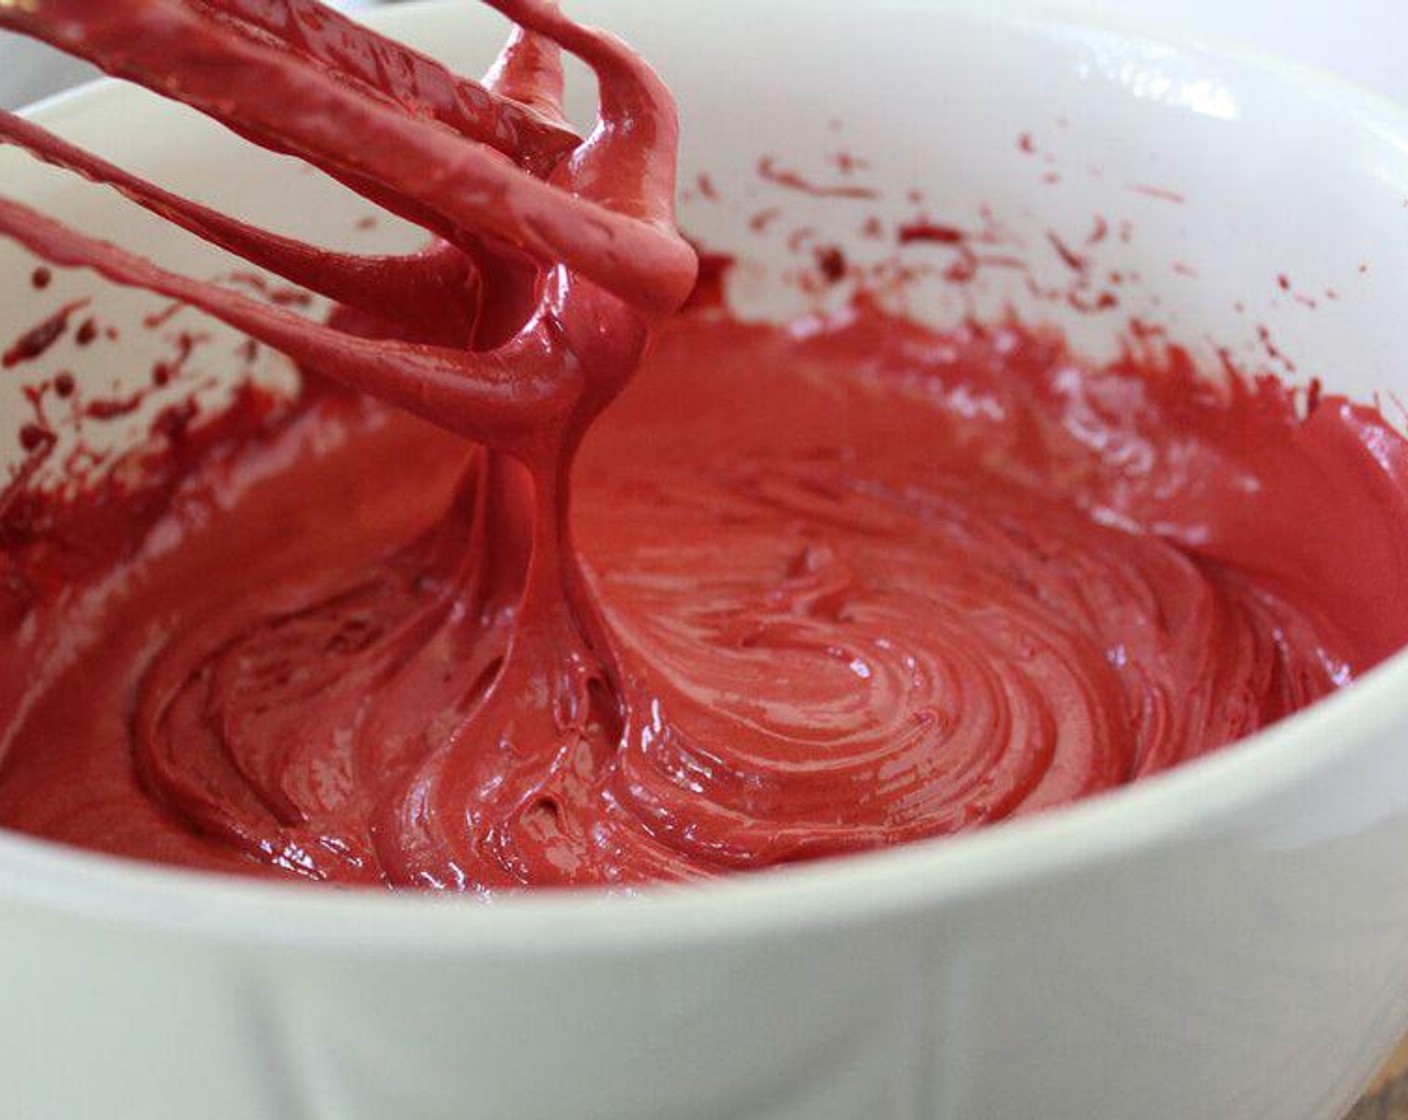 step 3 n a mixing bowl, combine the Red Velvet Cake Mix (1 box), Eggs (3), Vegetable Oil (1/2 cup) and Water (1/2 cup) with a hand mixer. Beat for about 3 minutes until the batter is smooth and creamy.